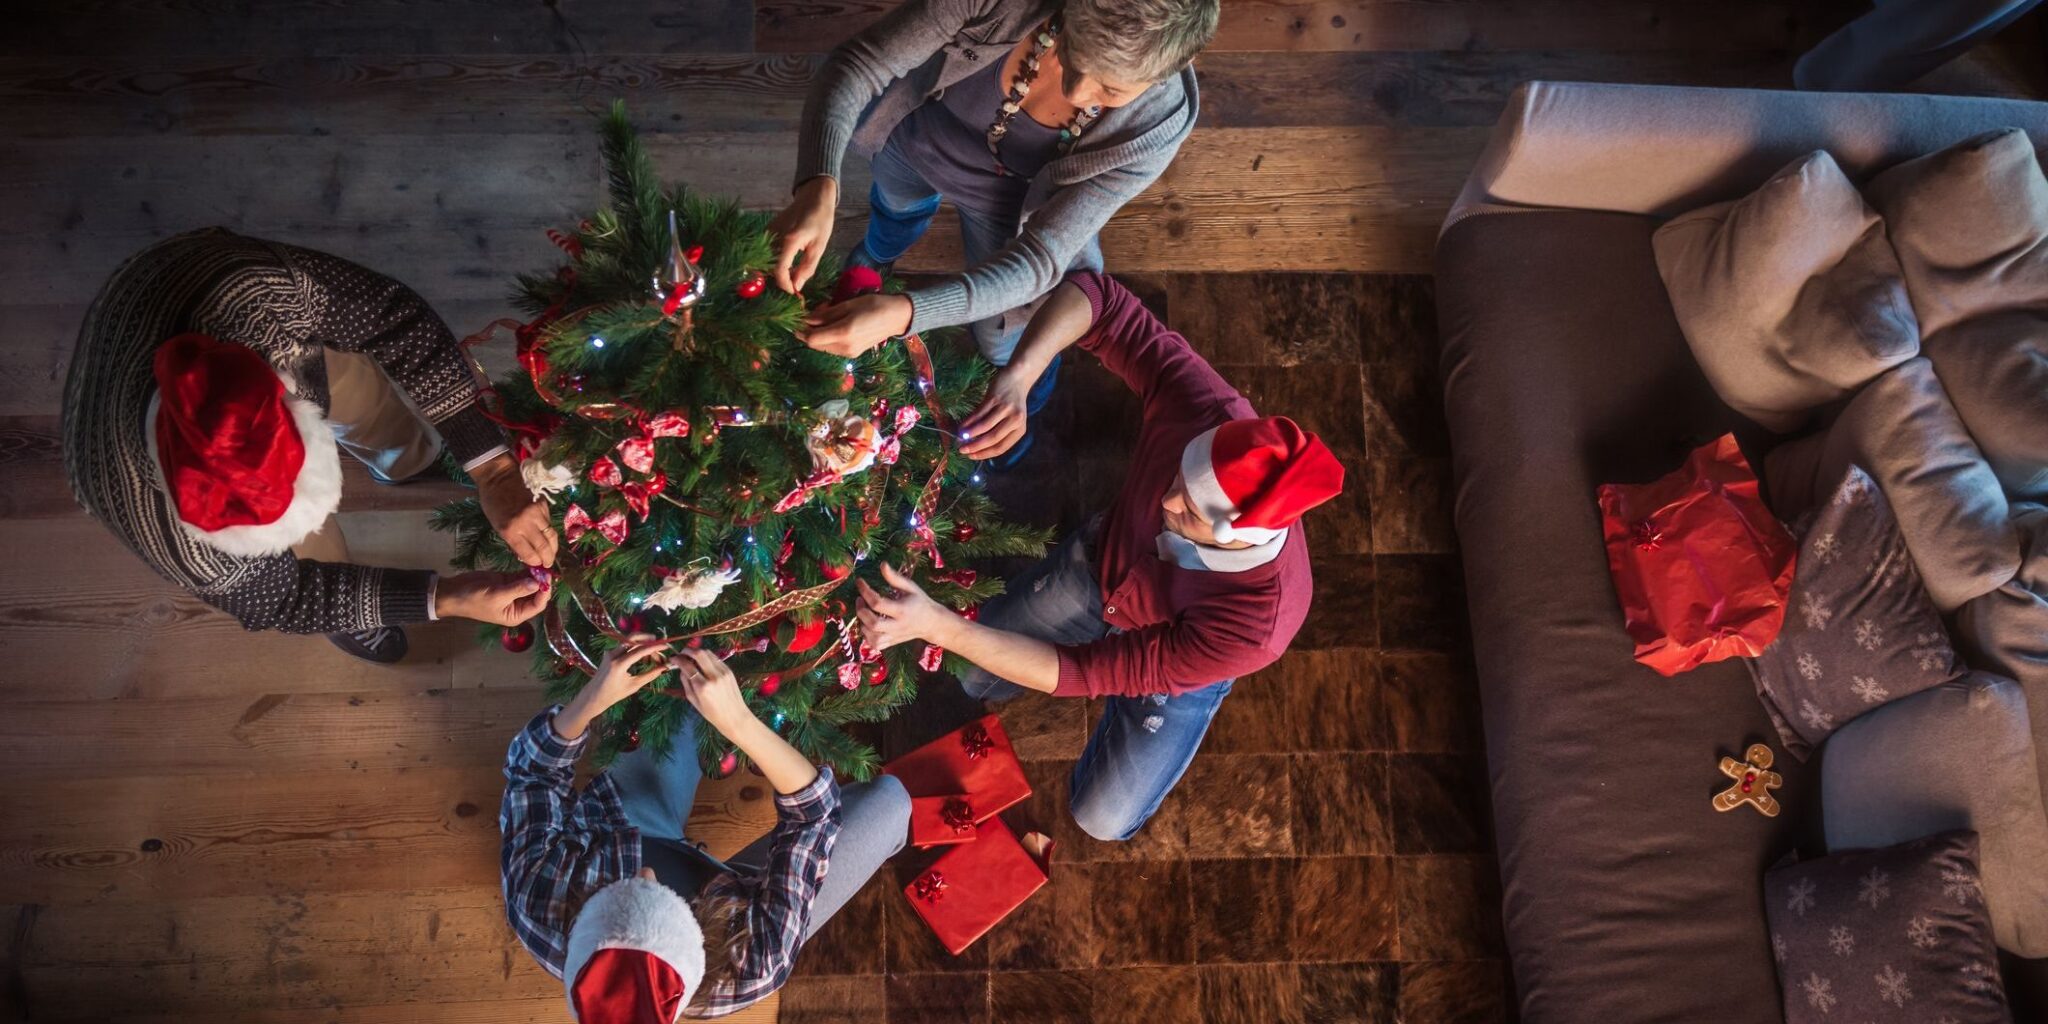 Overhead shot of a family decorating a Christmas tree